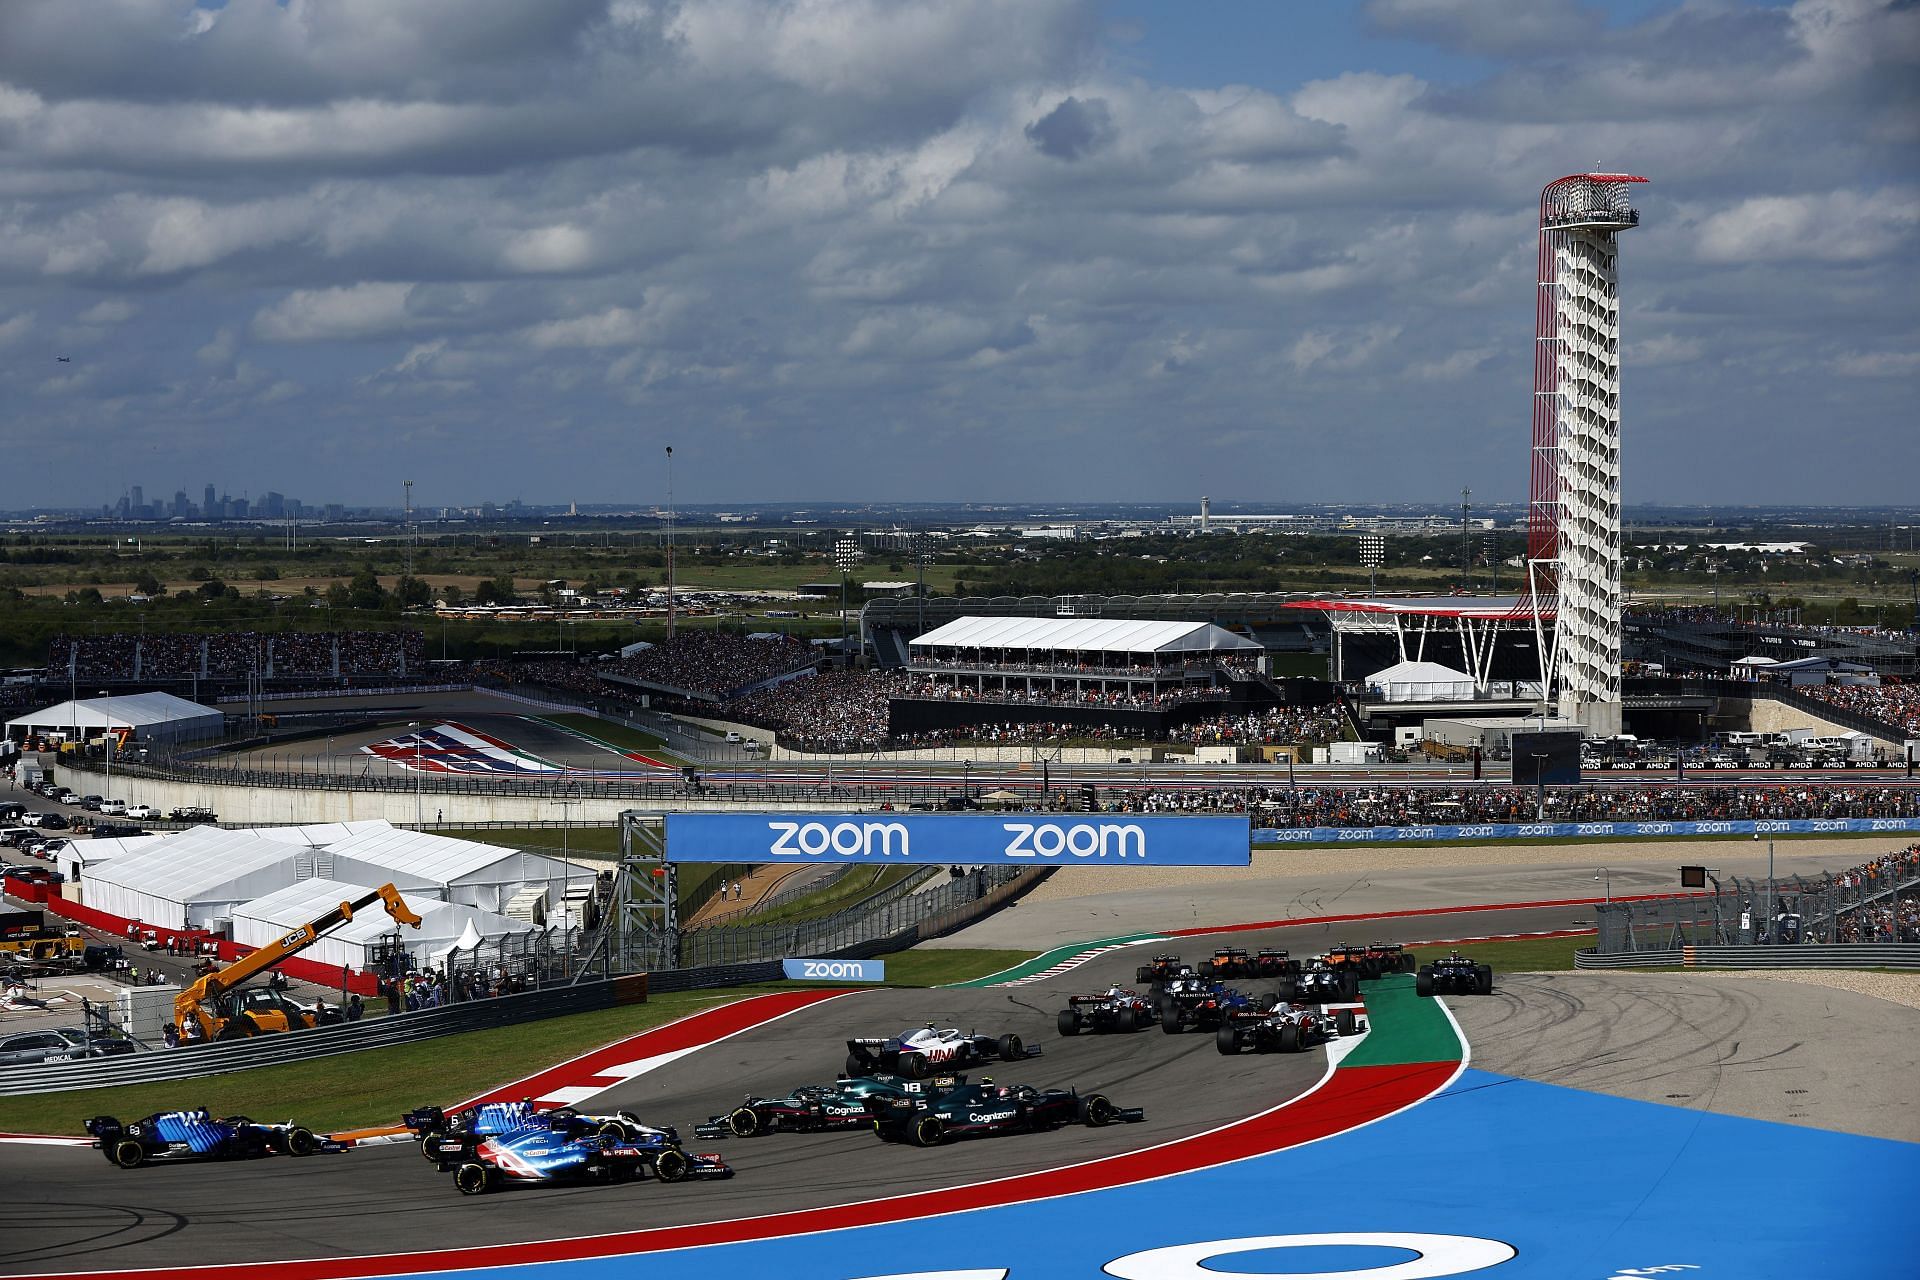 A general view of the start of the 2021 USGP in Austin, Texas. (Photo by Jared C. Tilton/Getty Images)